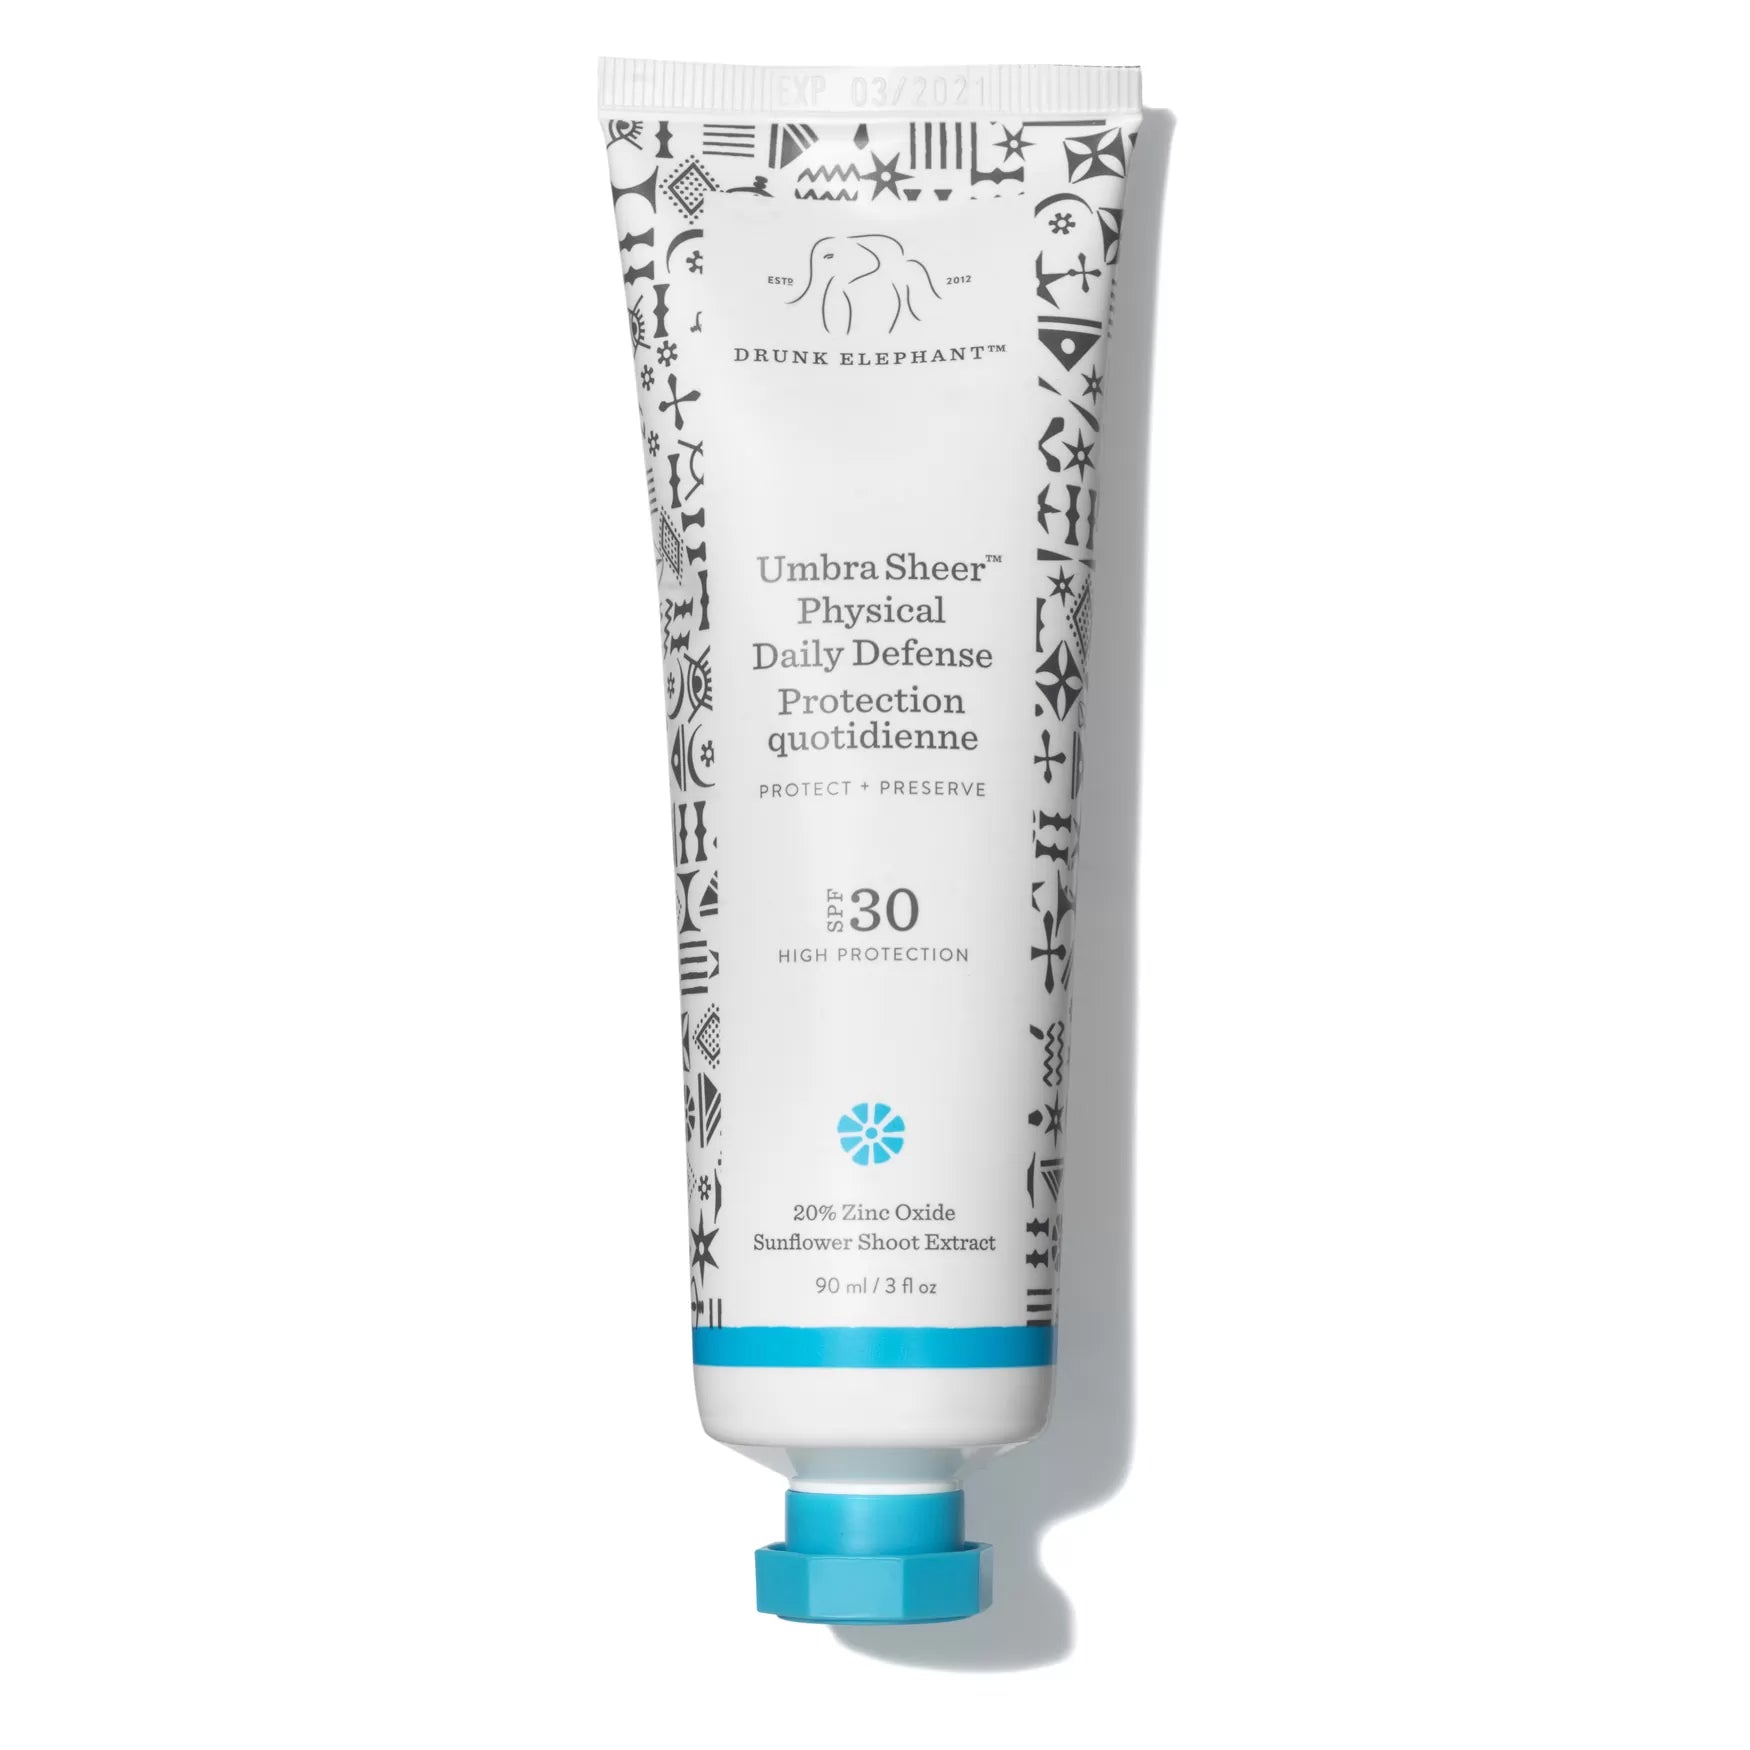 Drunk Elephant Umbra Sheer Daily Defense - Broad Spectrum SPF 30 SUNSCREEN with Marula Oil. (3 Ounce